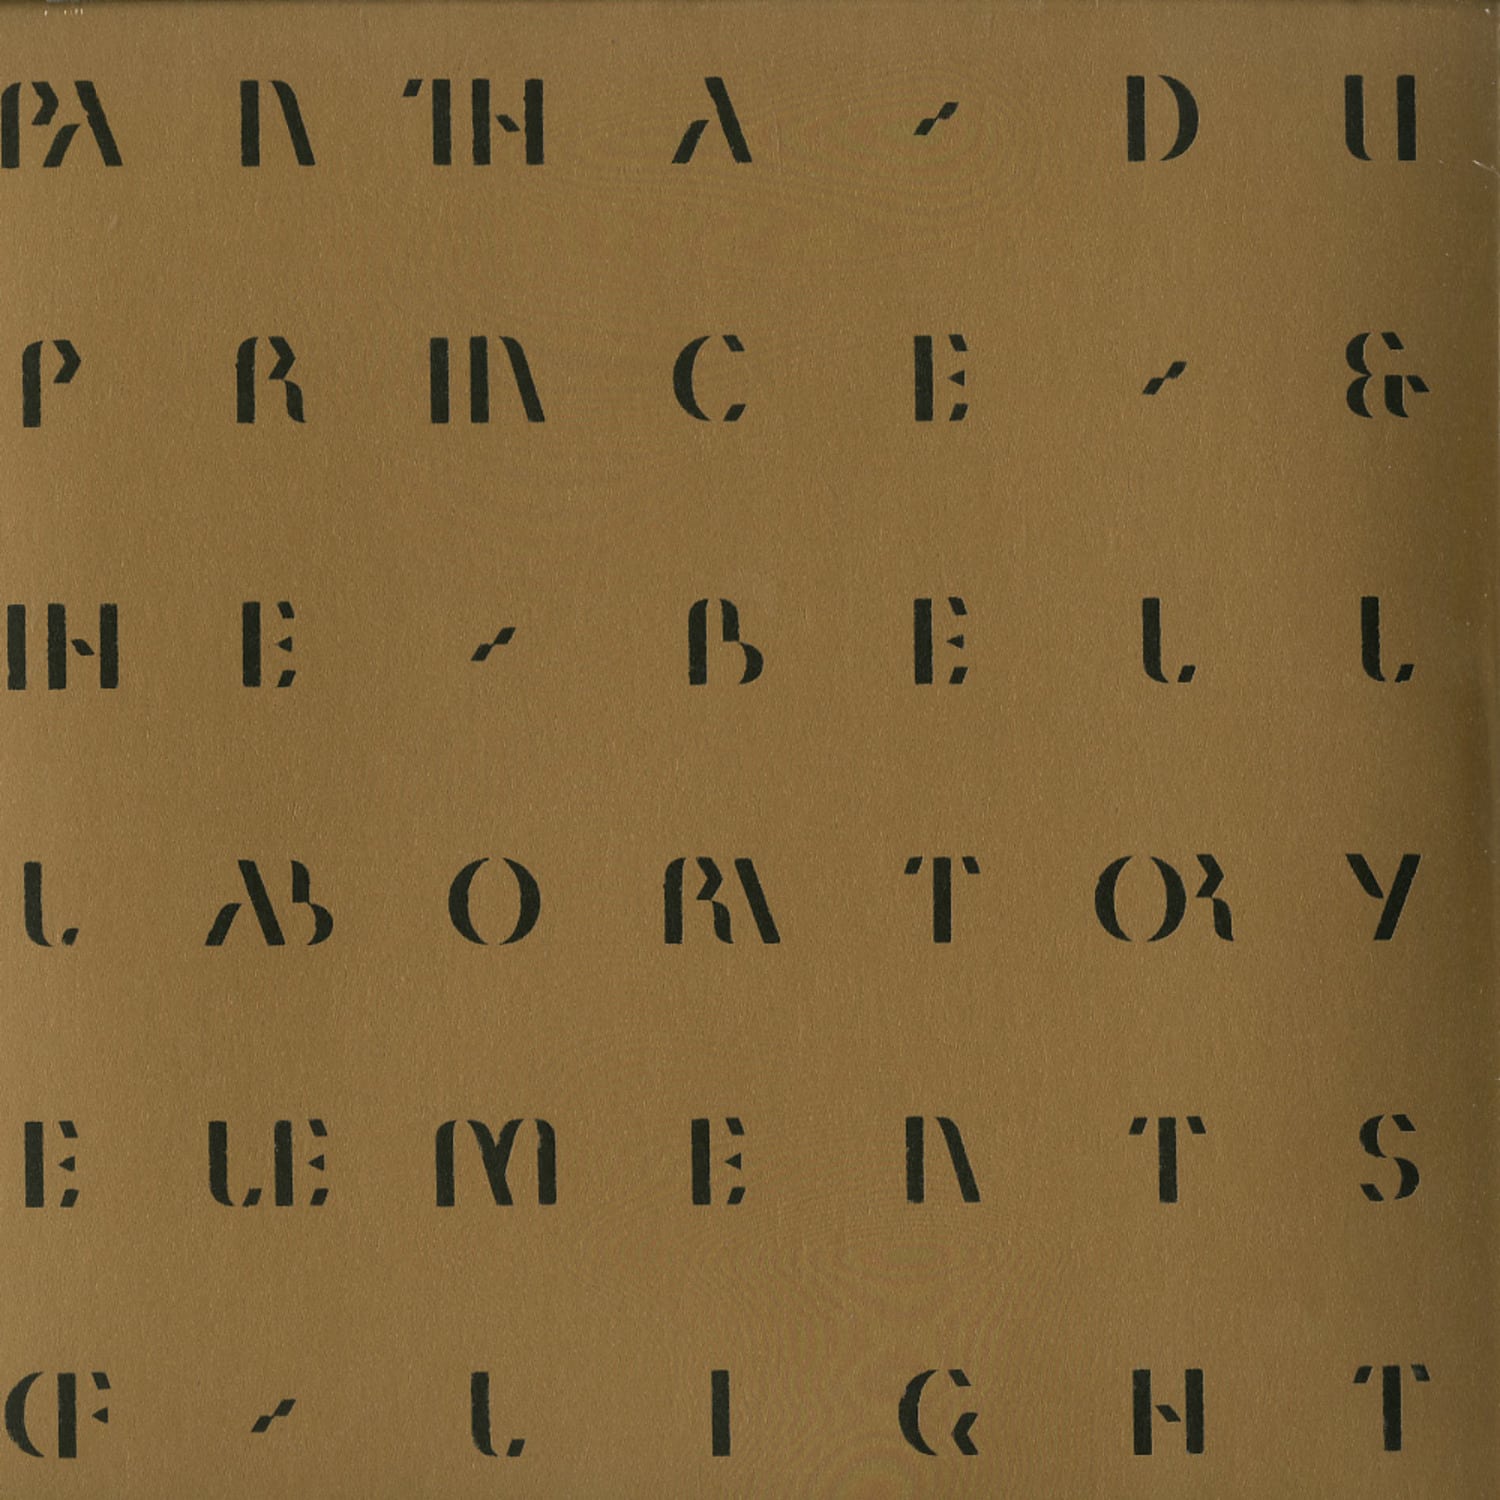 Pantha Du Prince & The Bell Laboratory - ELEMENTS OF LIGHT 